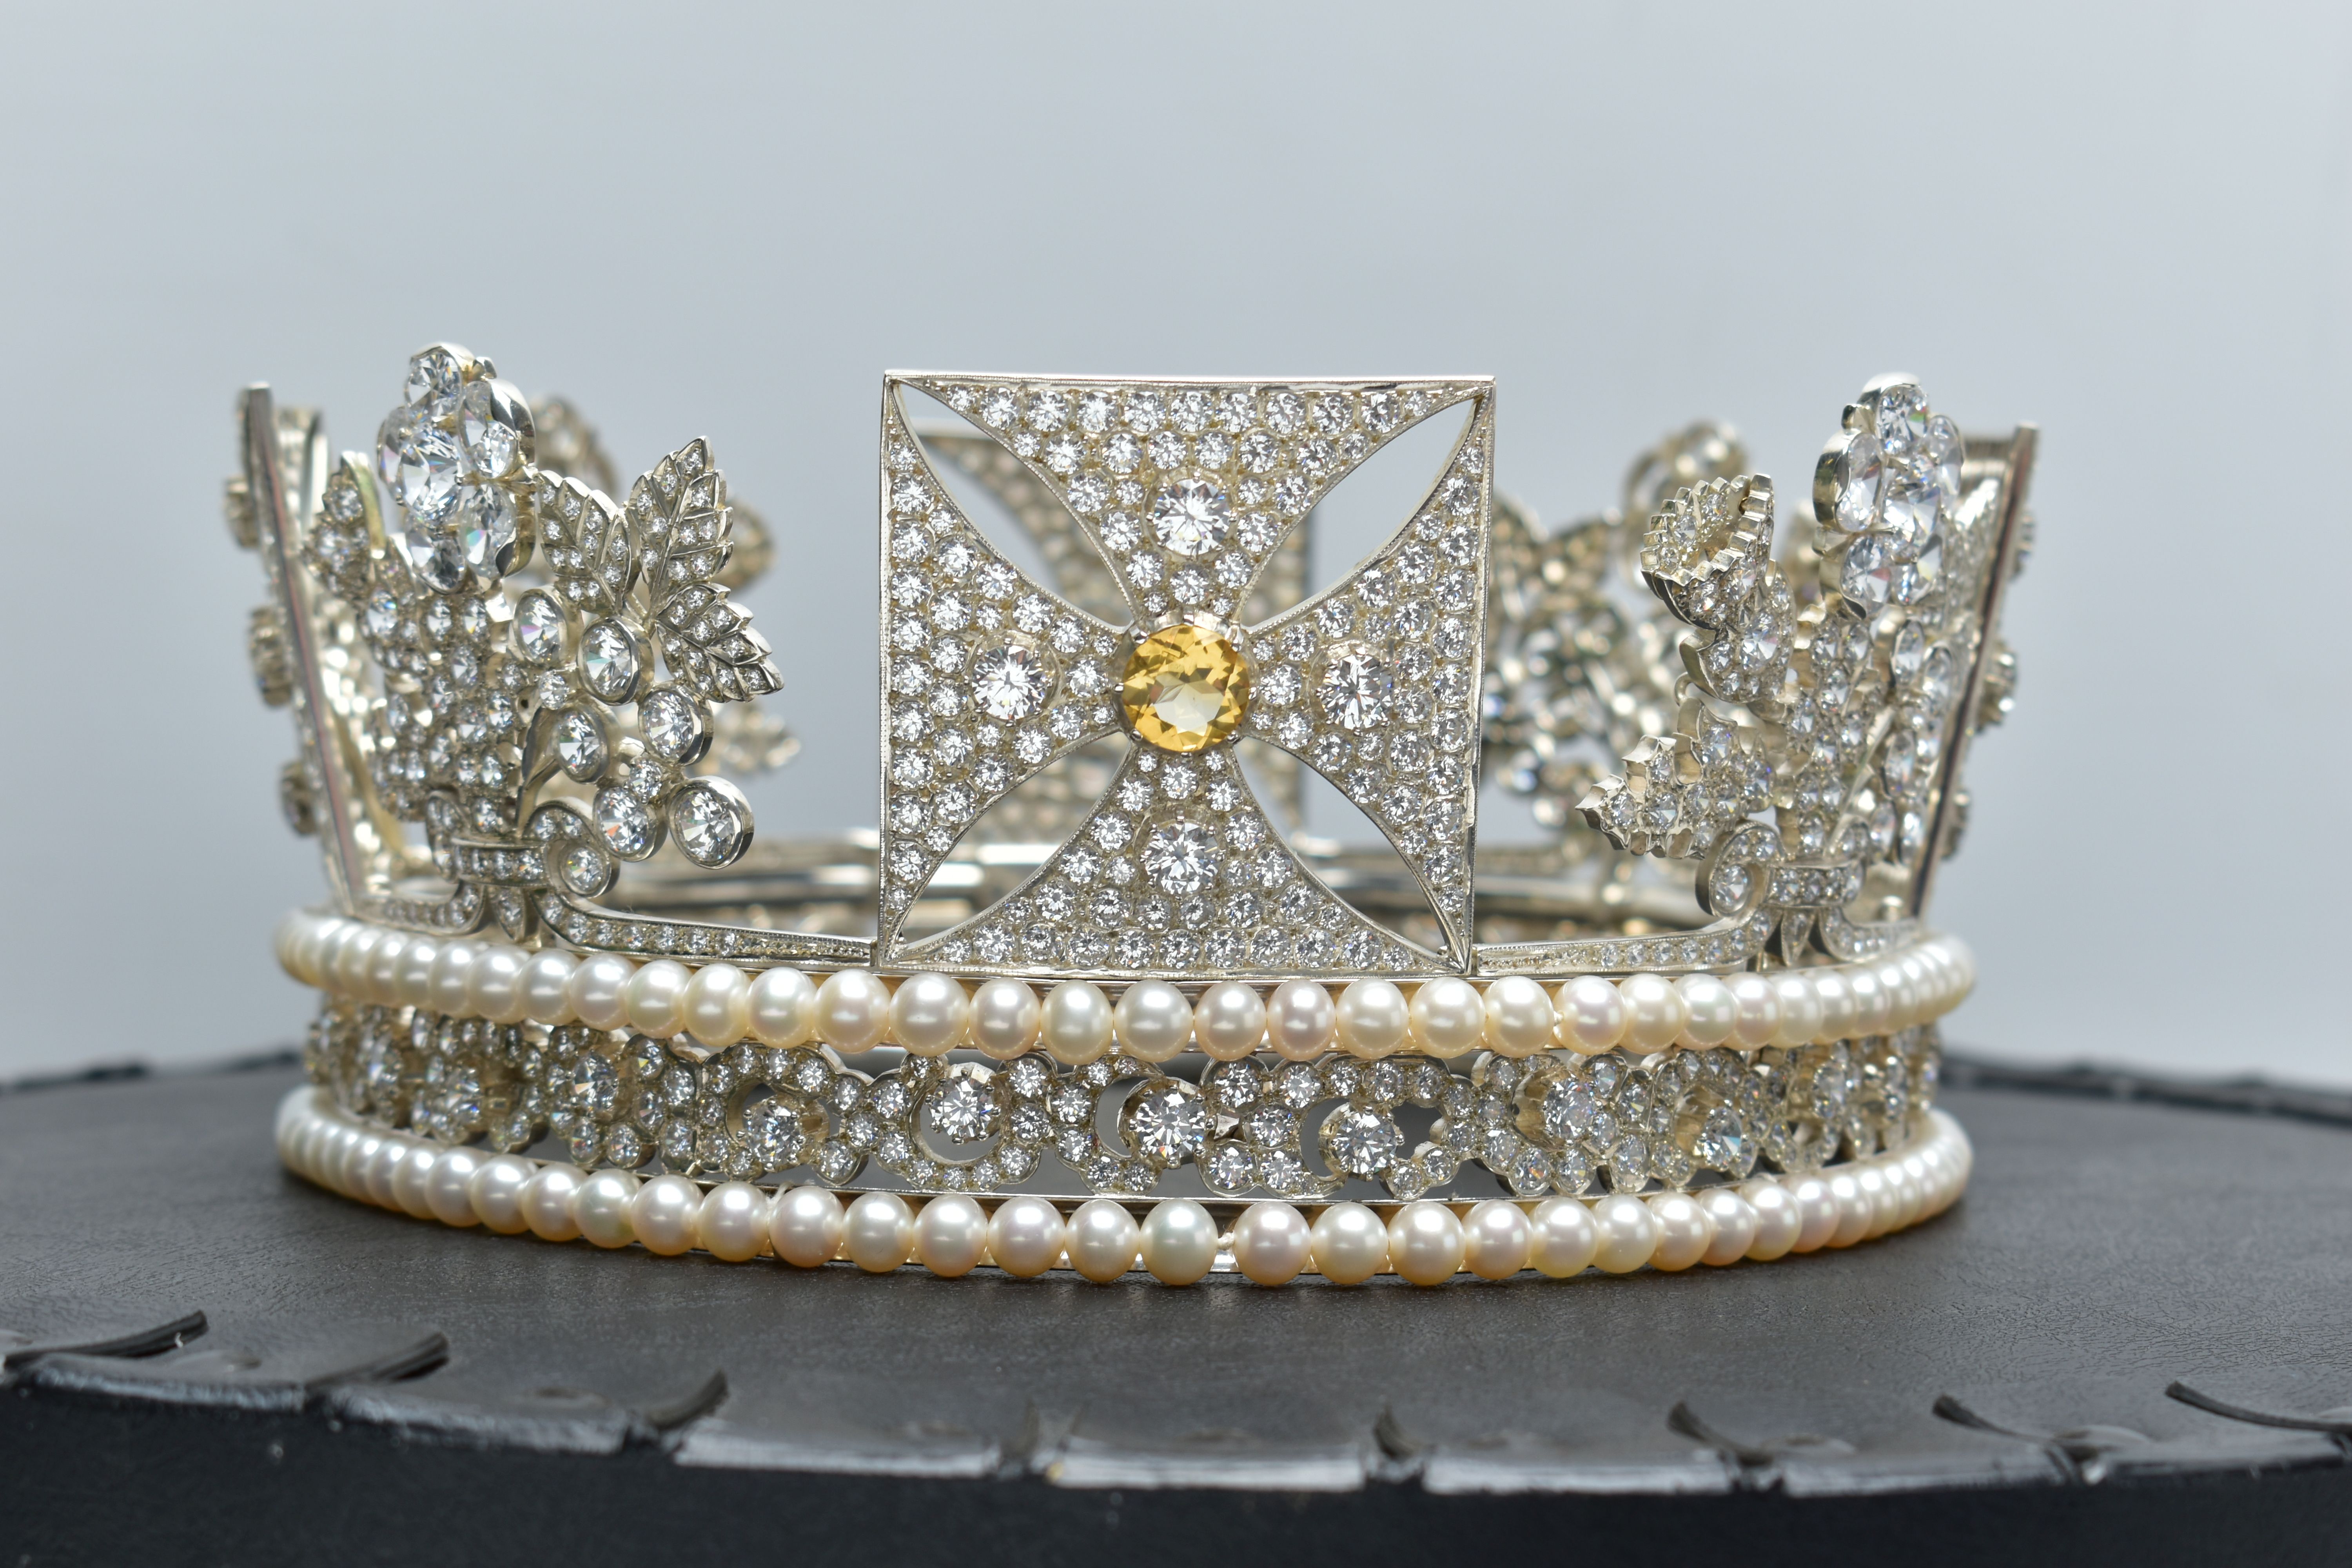 A royal replica for auction in Lichfield - J'AIME MAGAZINE